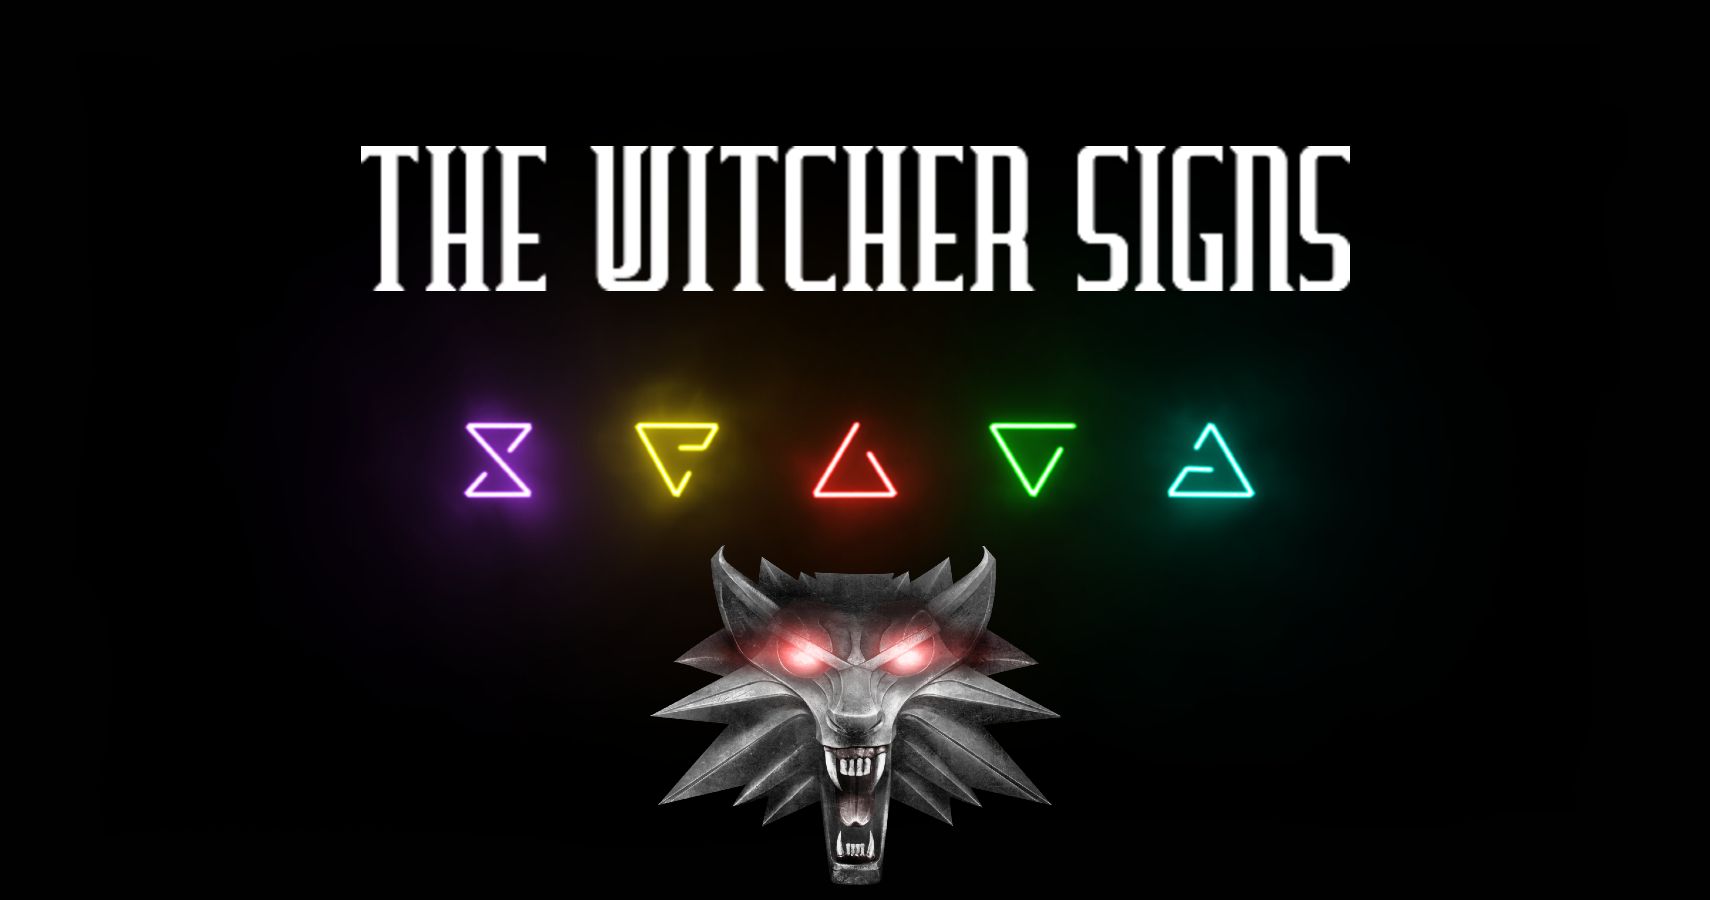 The witcher signs живые обои